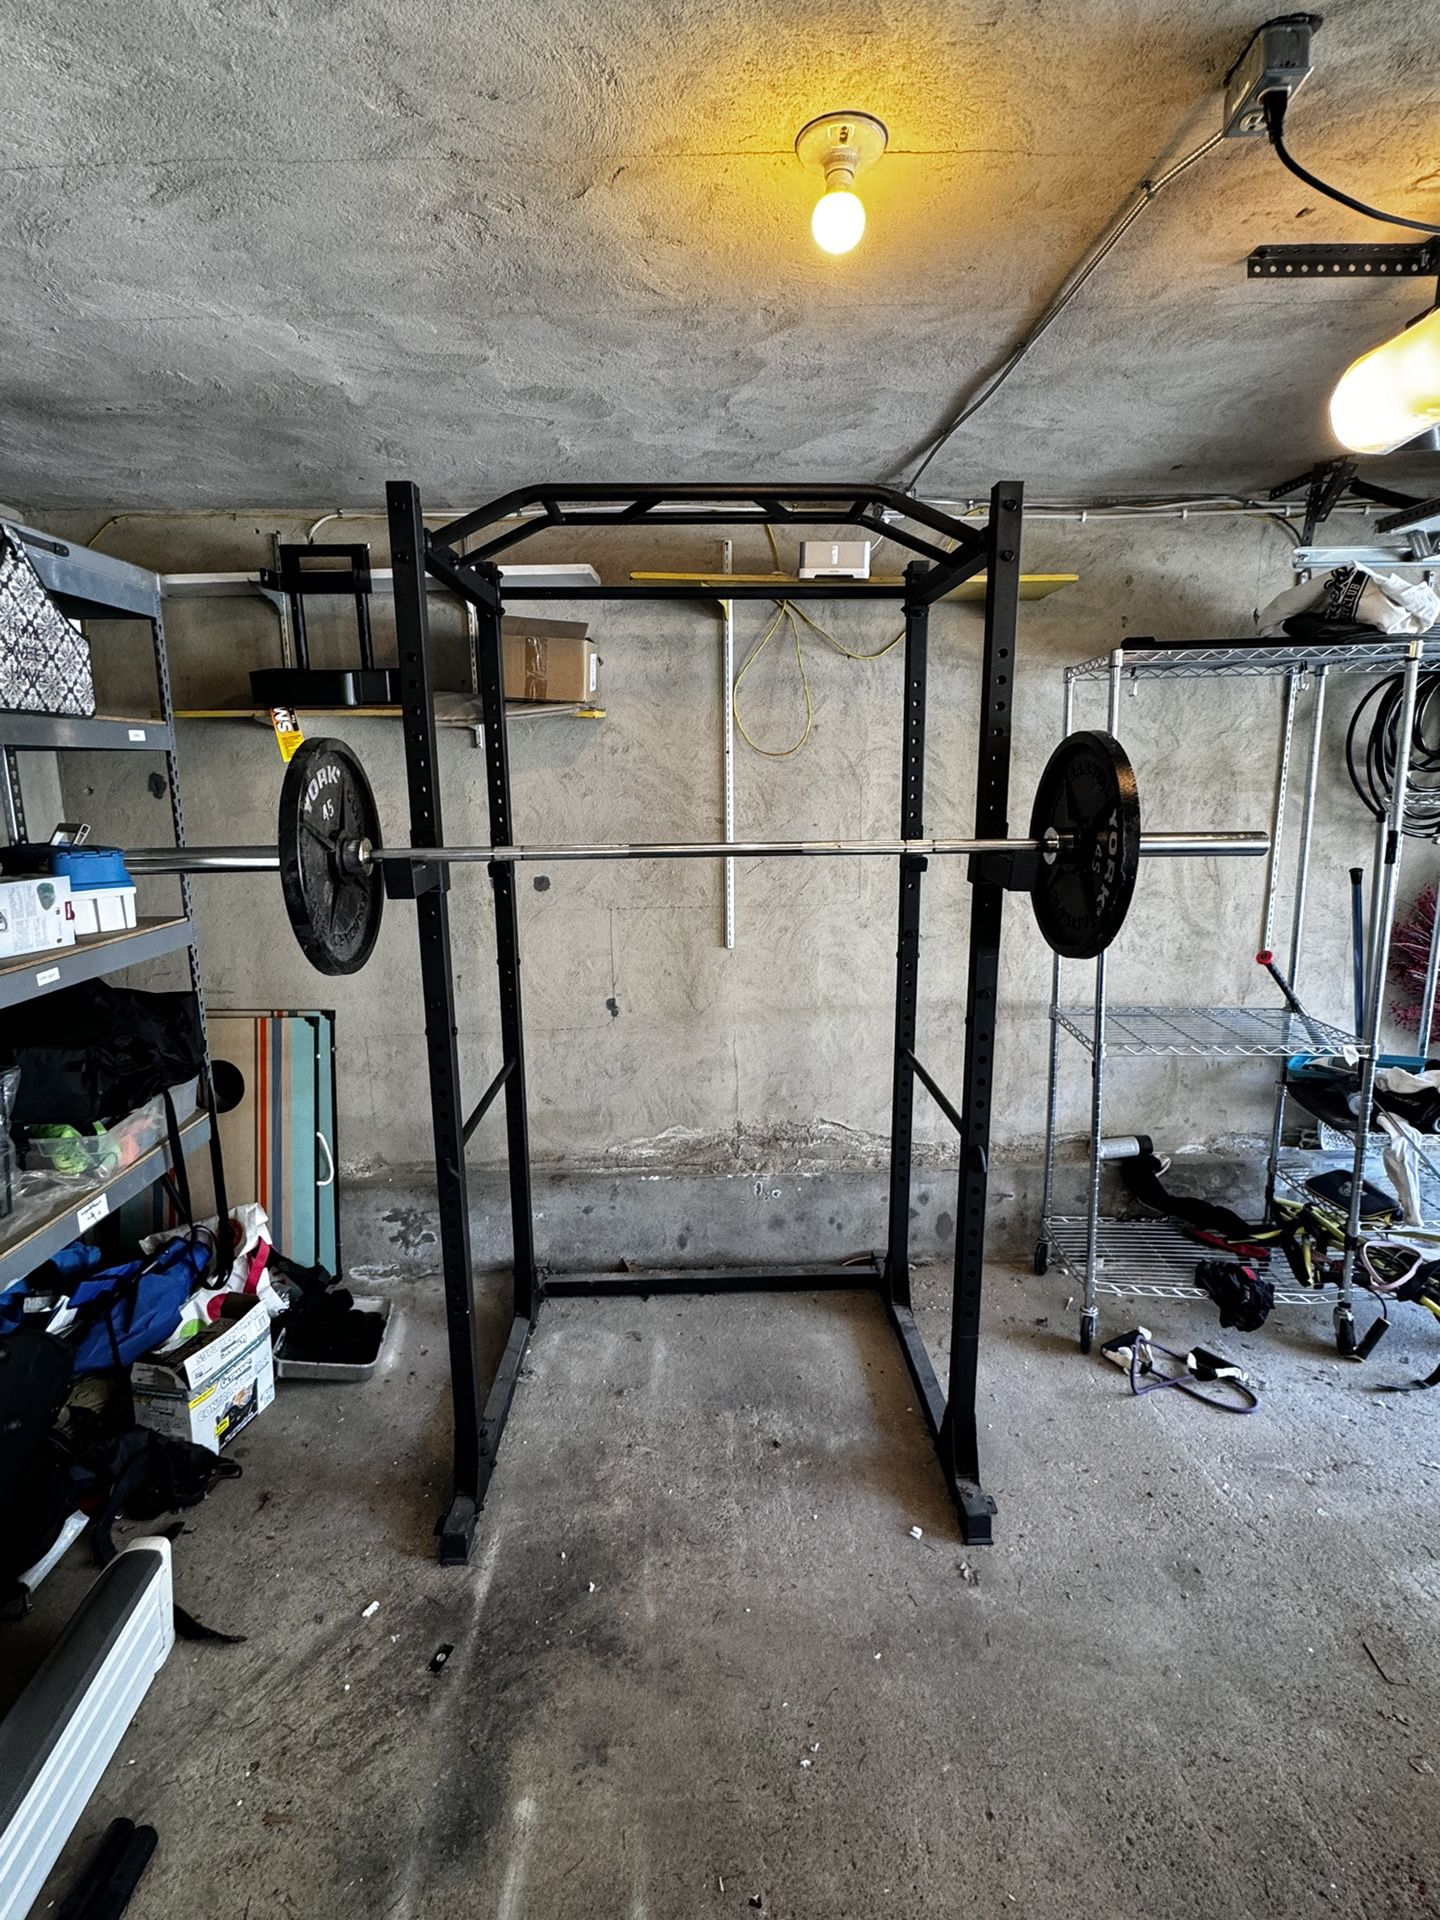 Squat Rack with a Barbell and 2 45 pound Plates